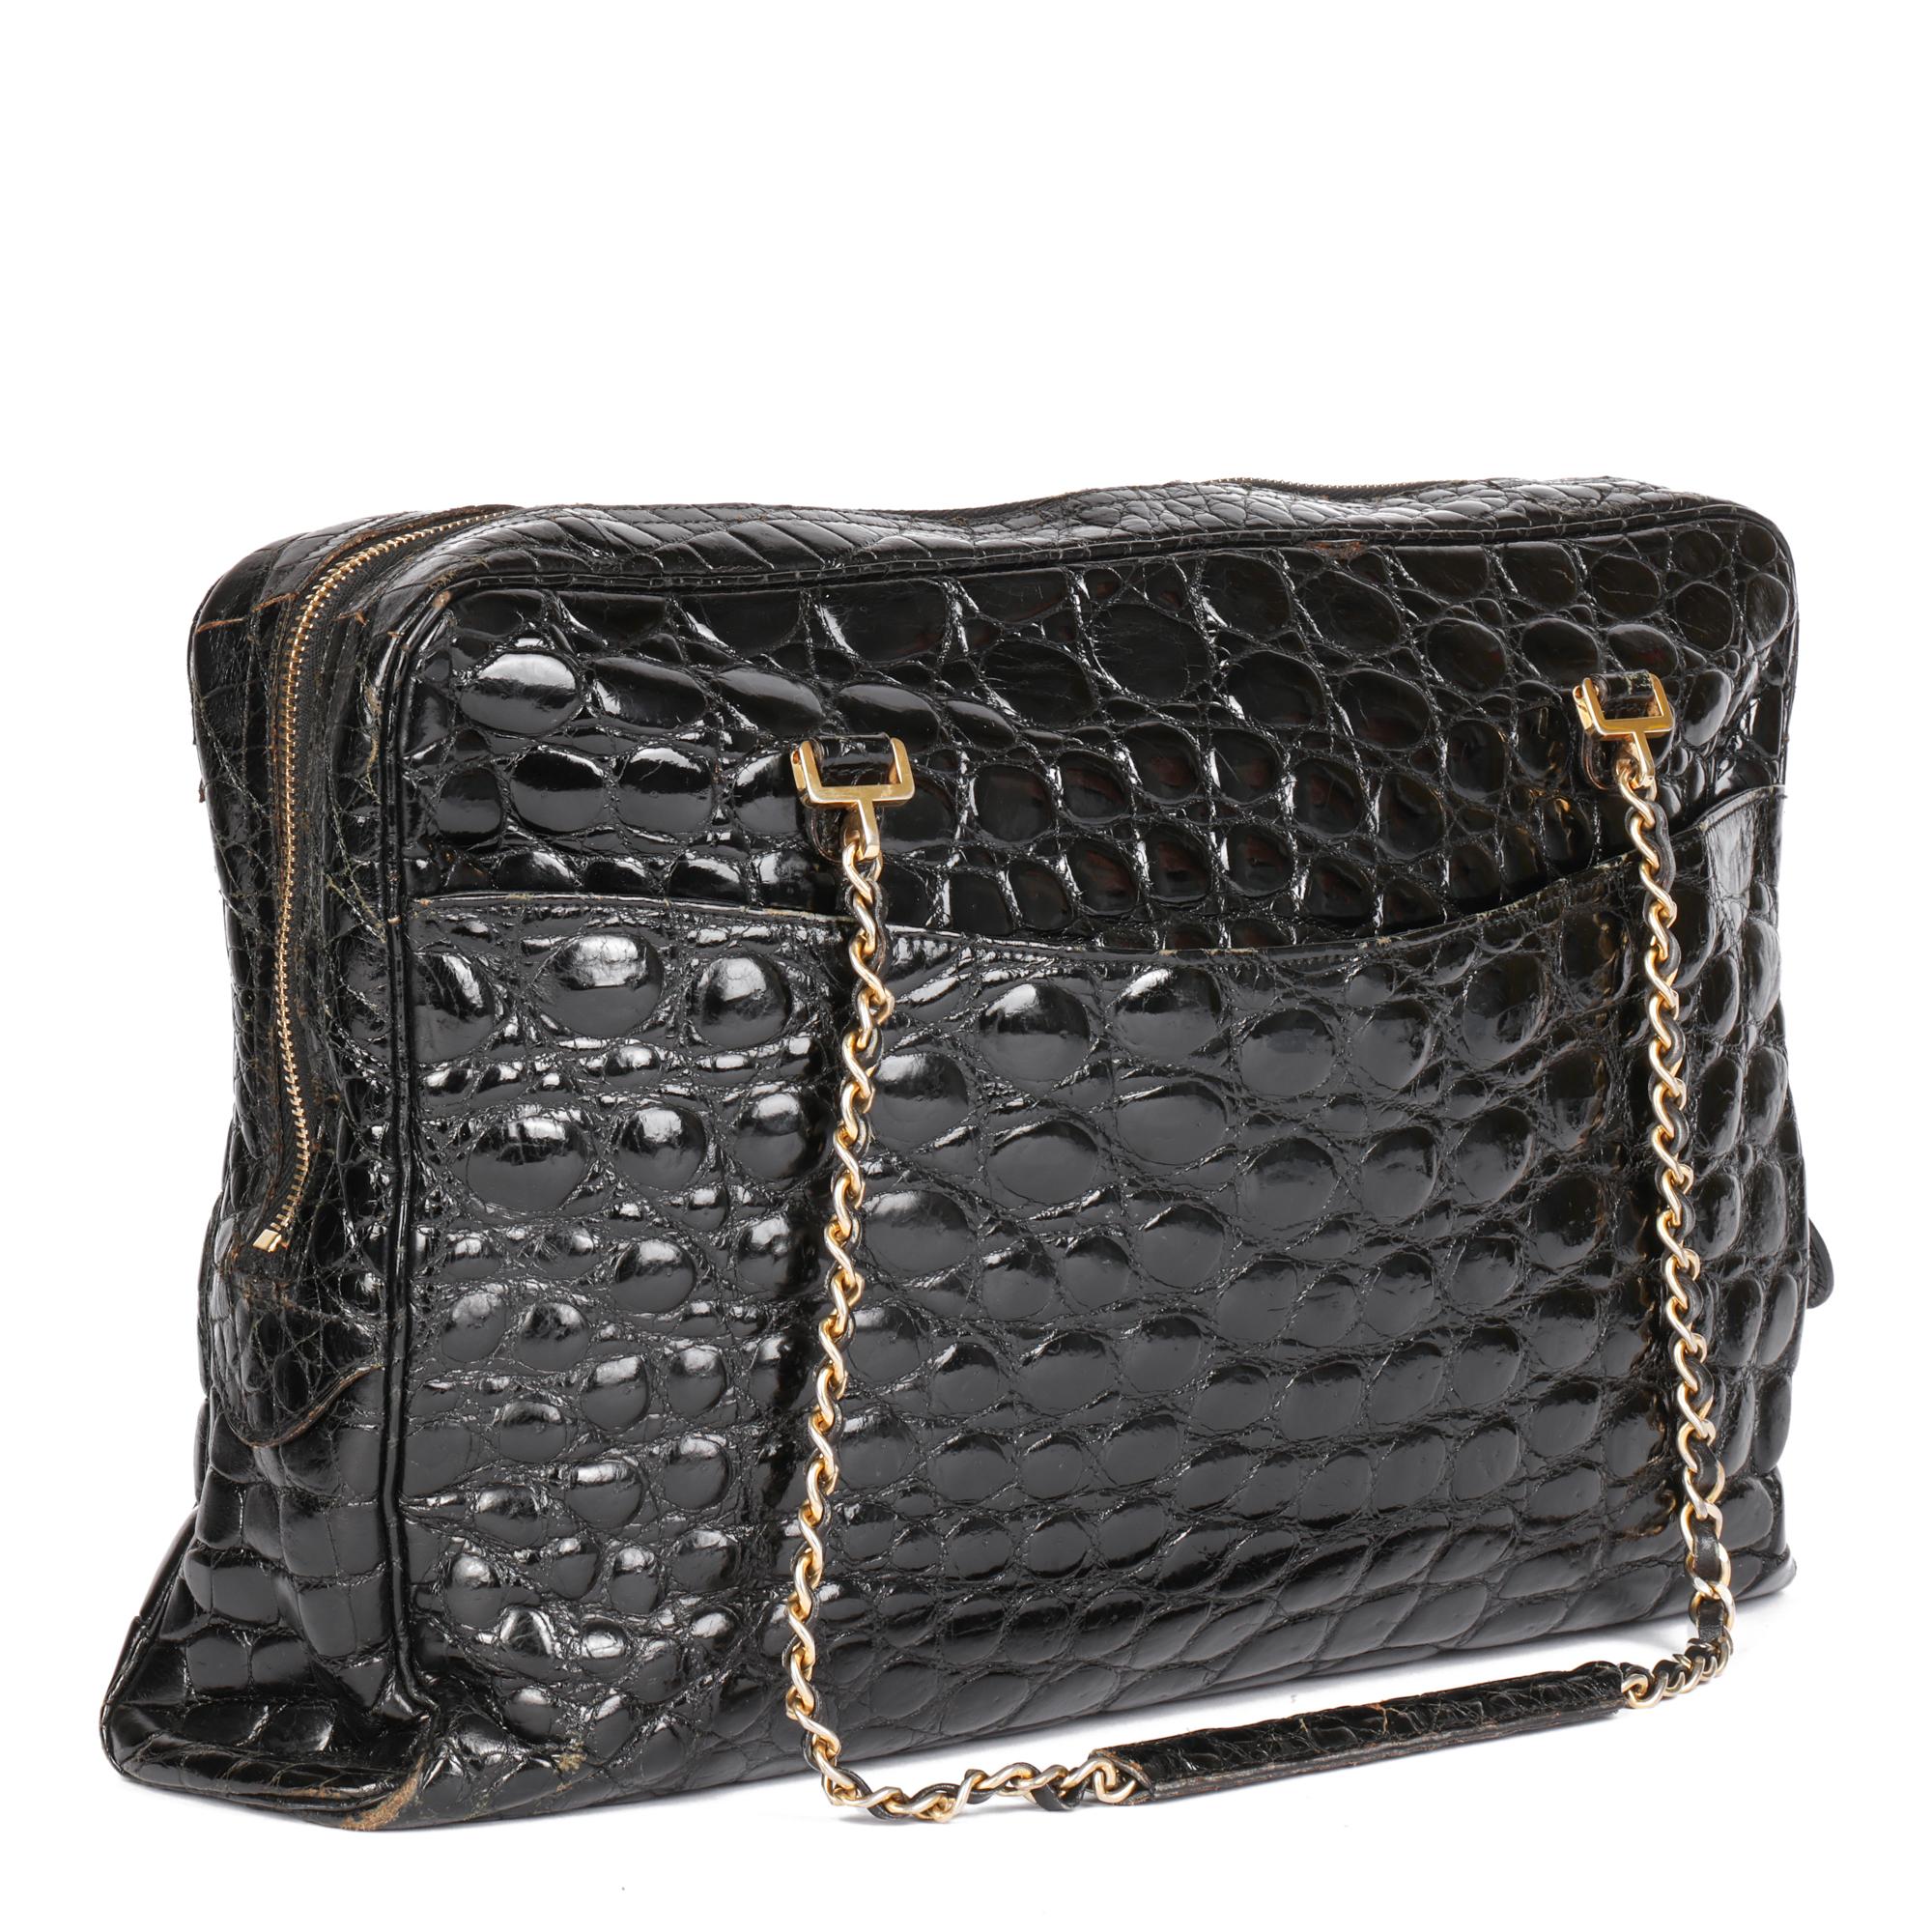 CHANEL 
Black Shiny Crocodile Leather Vintage Camera Bag

Serial Number: X
Age (Circa): 1980
Accompanied By: Chanel Dust Bag
Authenticity Details: (Made in France)
Gender: Ladies
Type: Shoulder

Colour: Black
Hardware: Gold
Material(s): Shiny